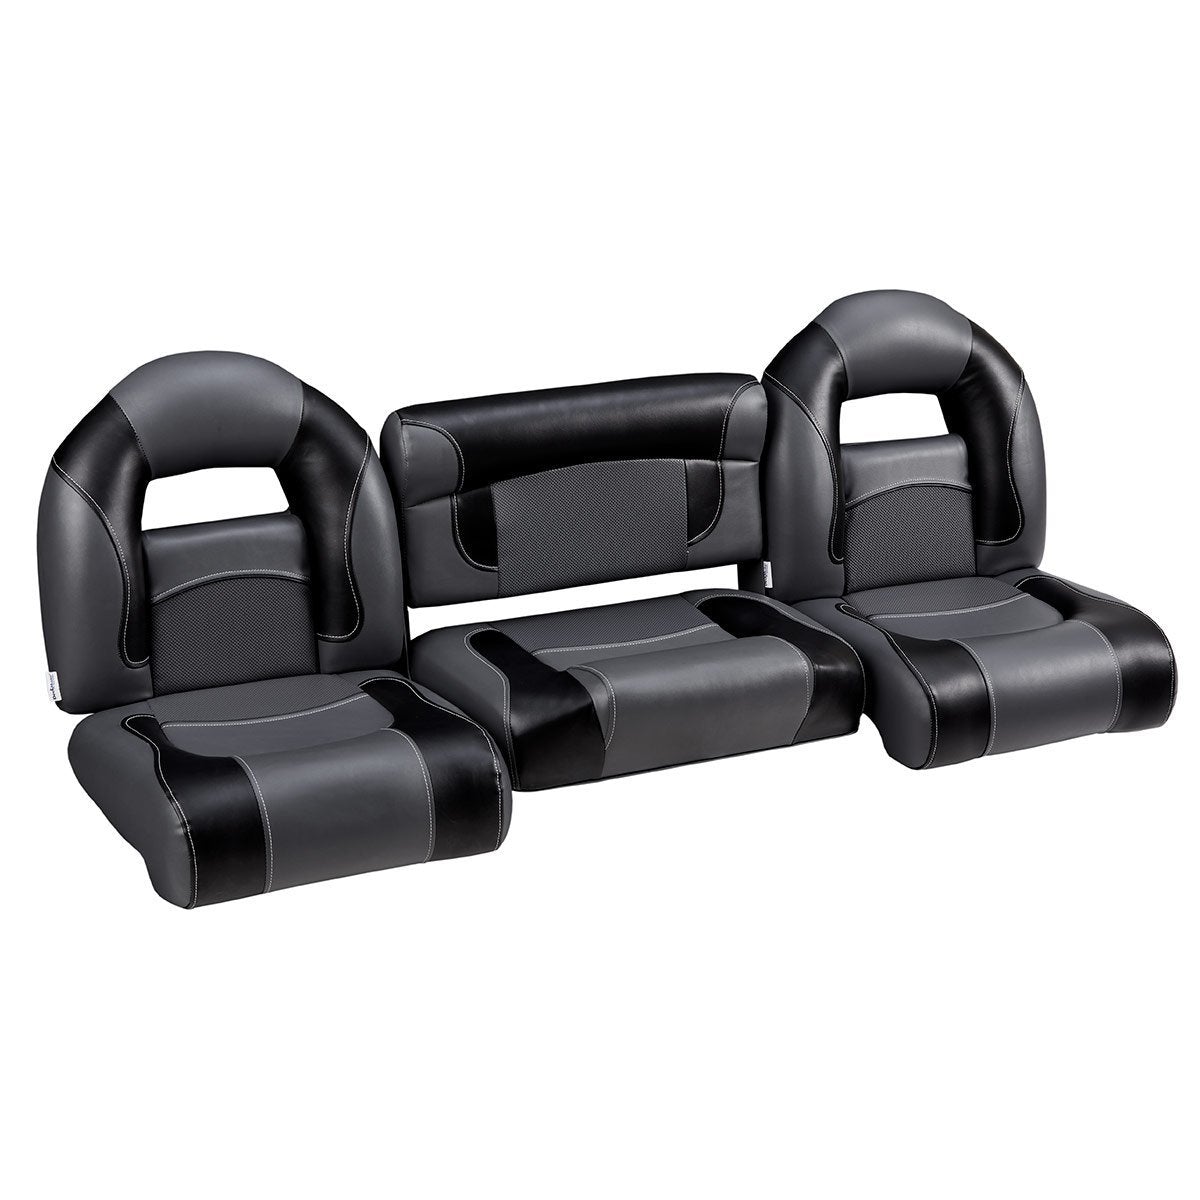 64 Compact Boat Bench Seats